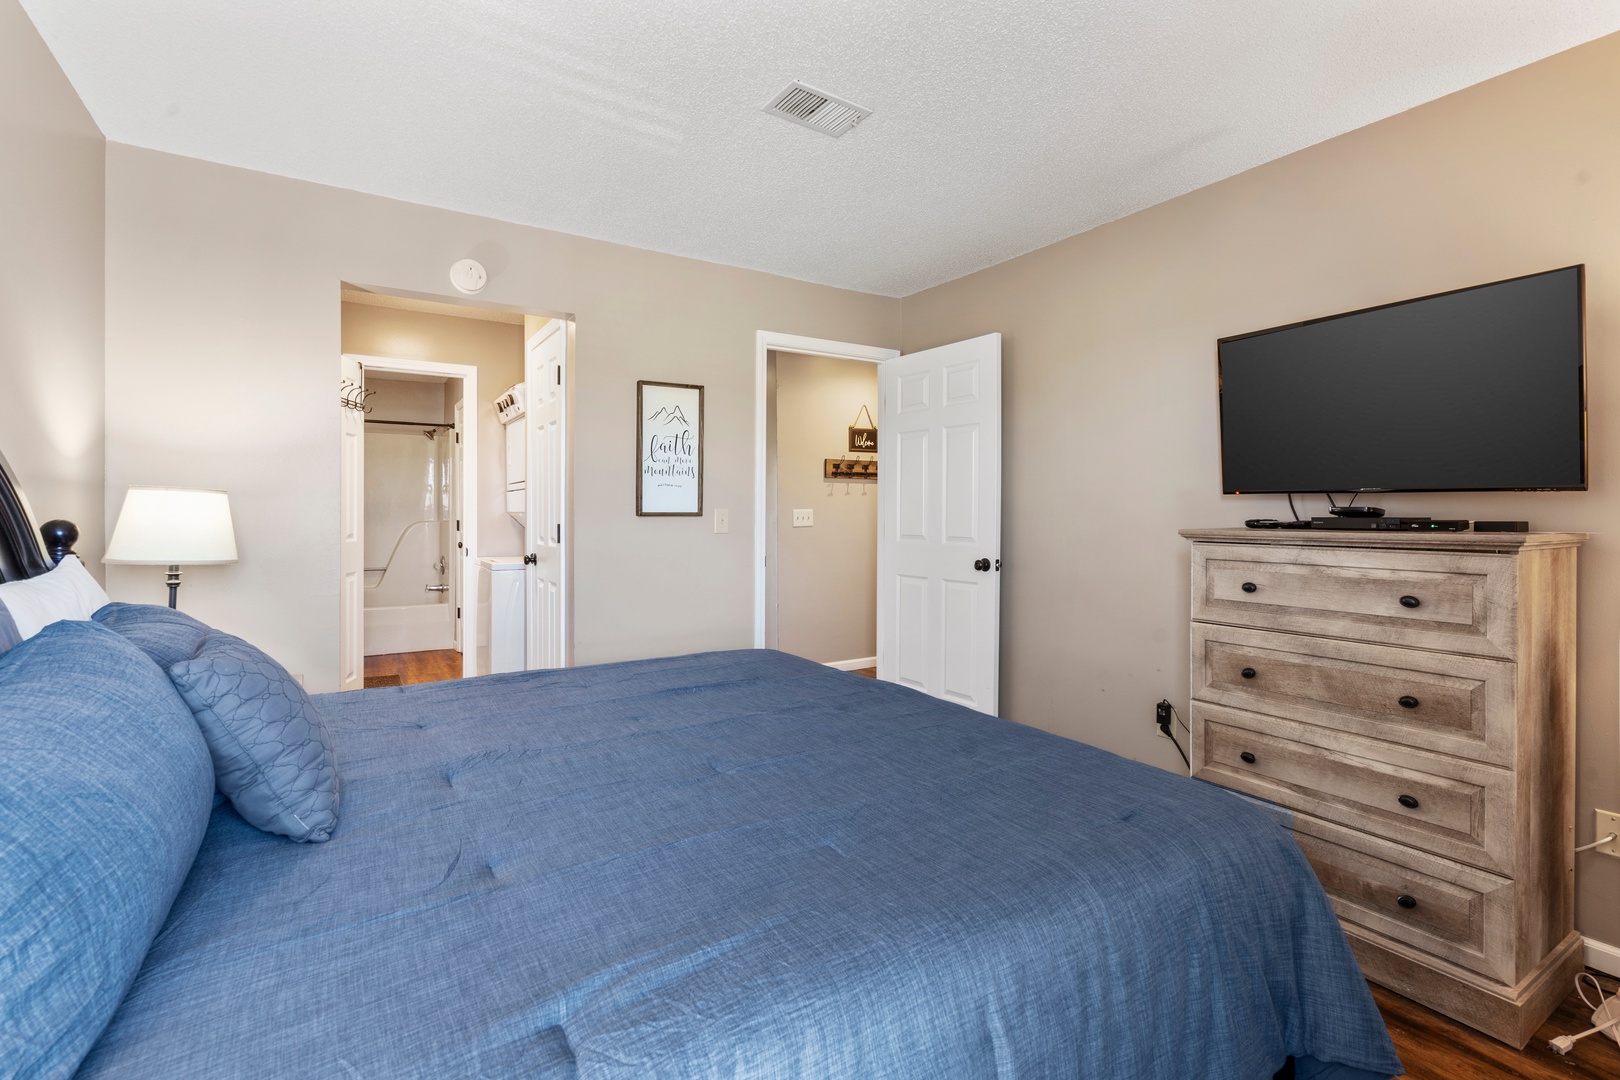 The tranquil primary suite boasts a plush king bed, ensuite, & TV